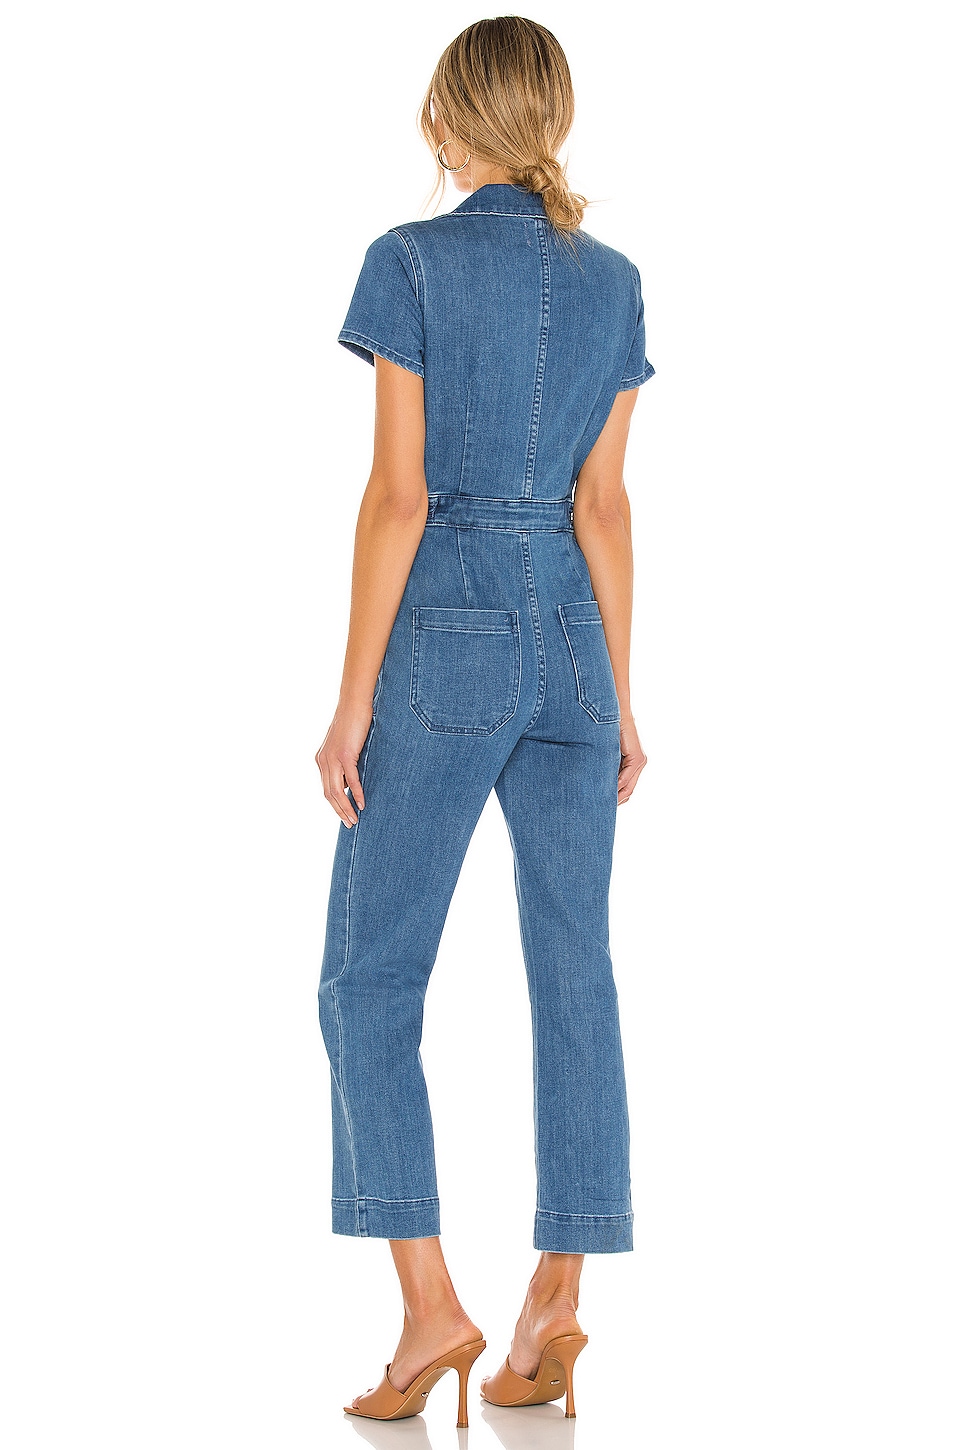 Show Me Your Mumu Emery Jumpsuit in French Blue | REVOLVE